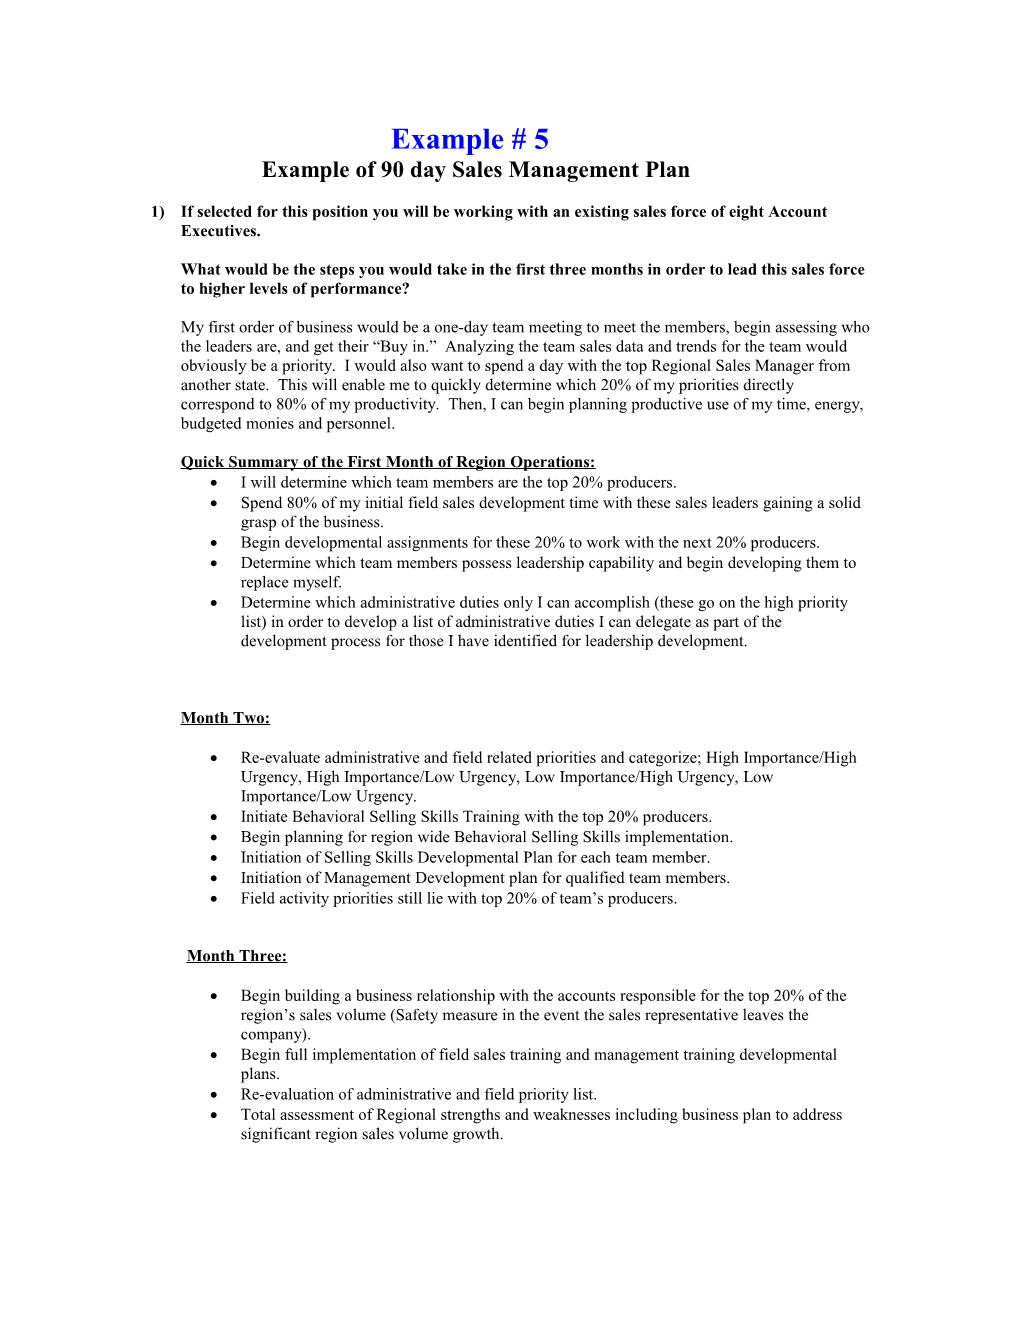 Example of 90 Day Sales Management Plan